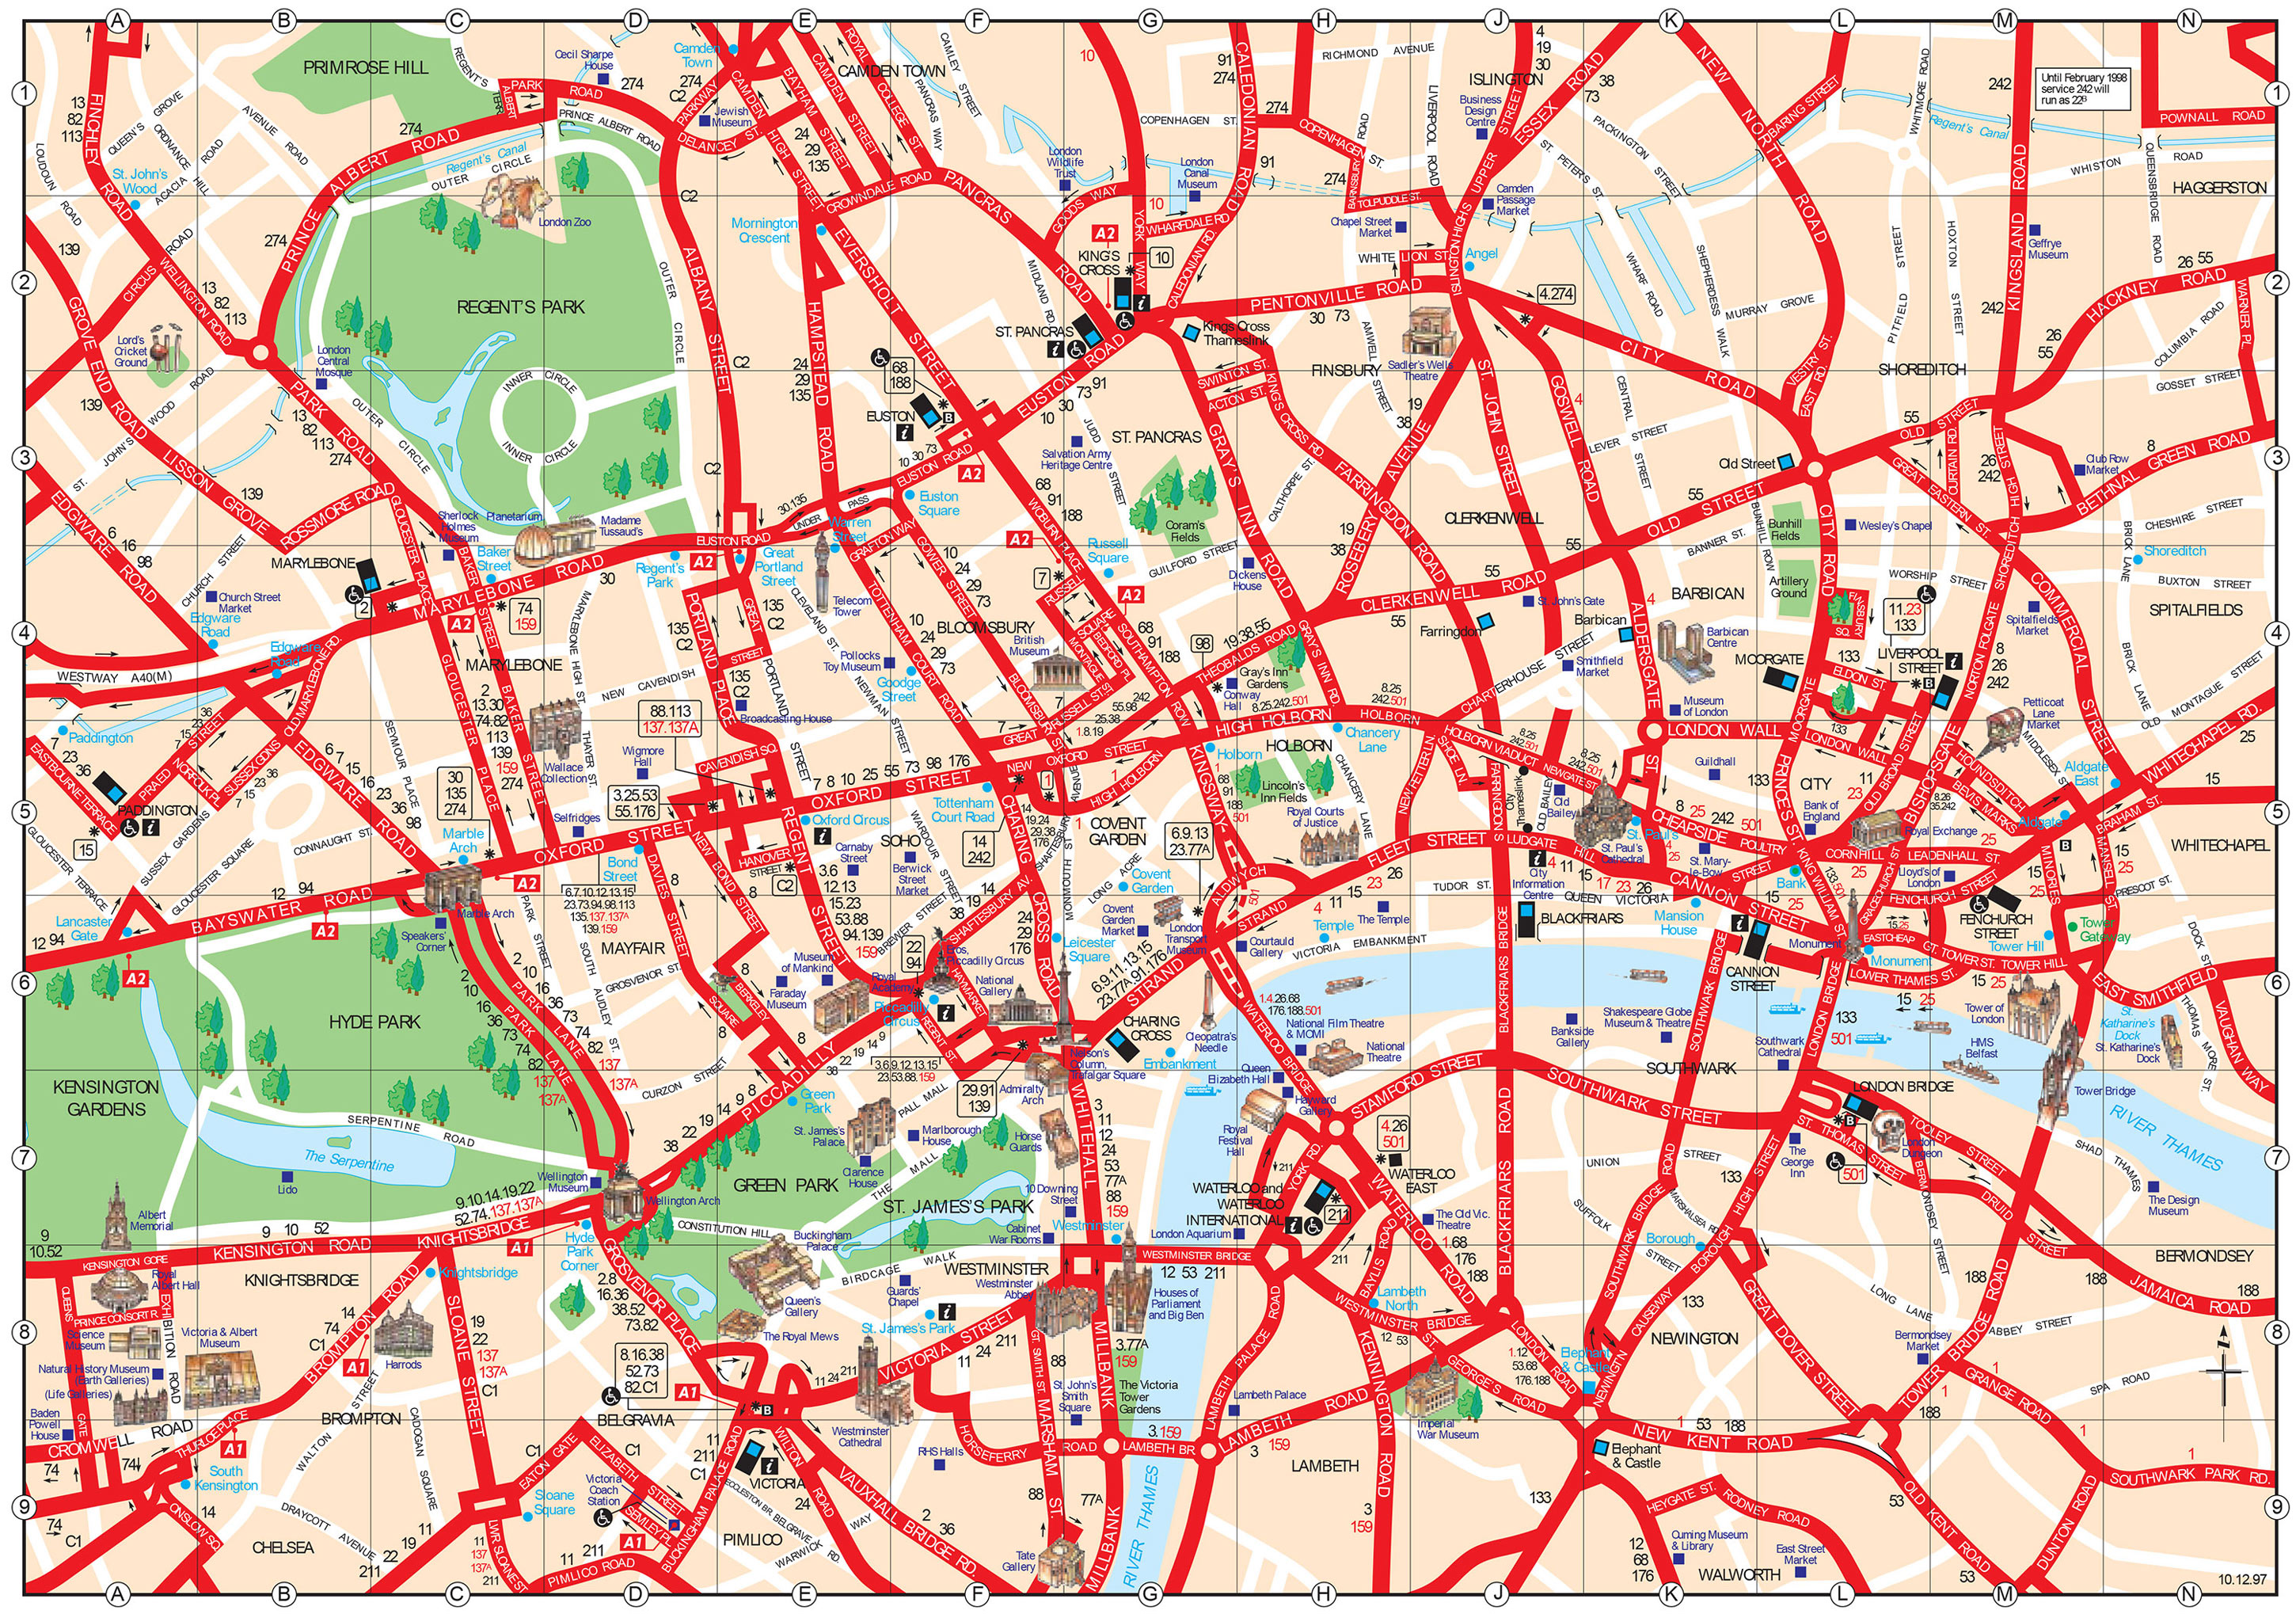 Map of London tourist attractions, sightseeing & tourist tour